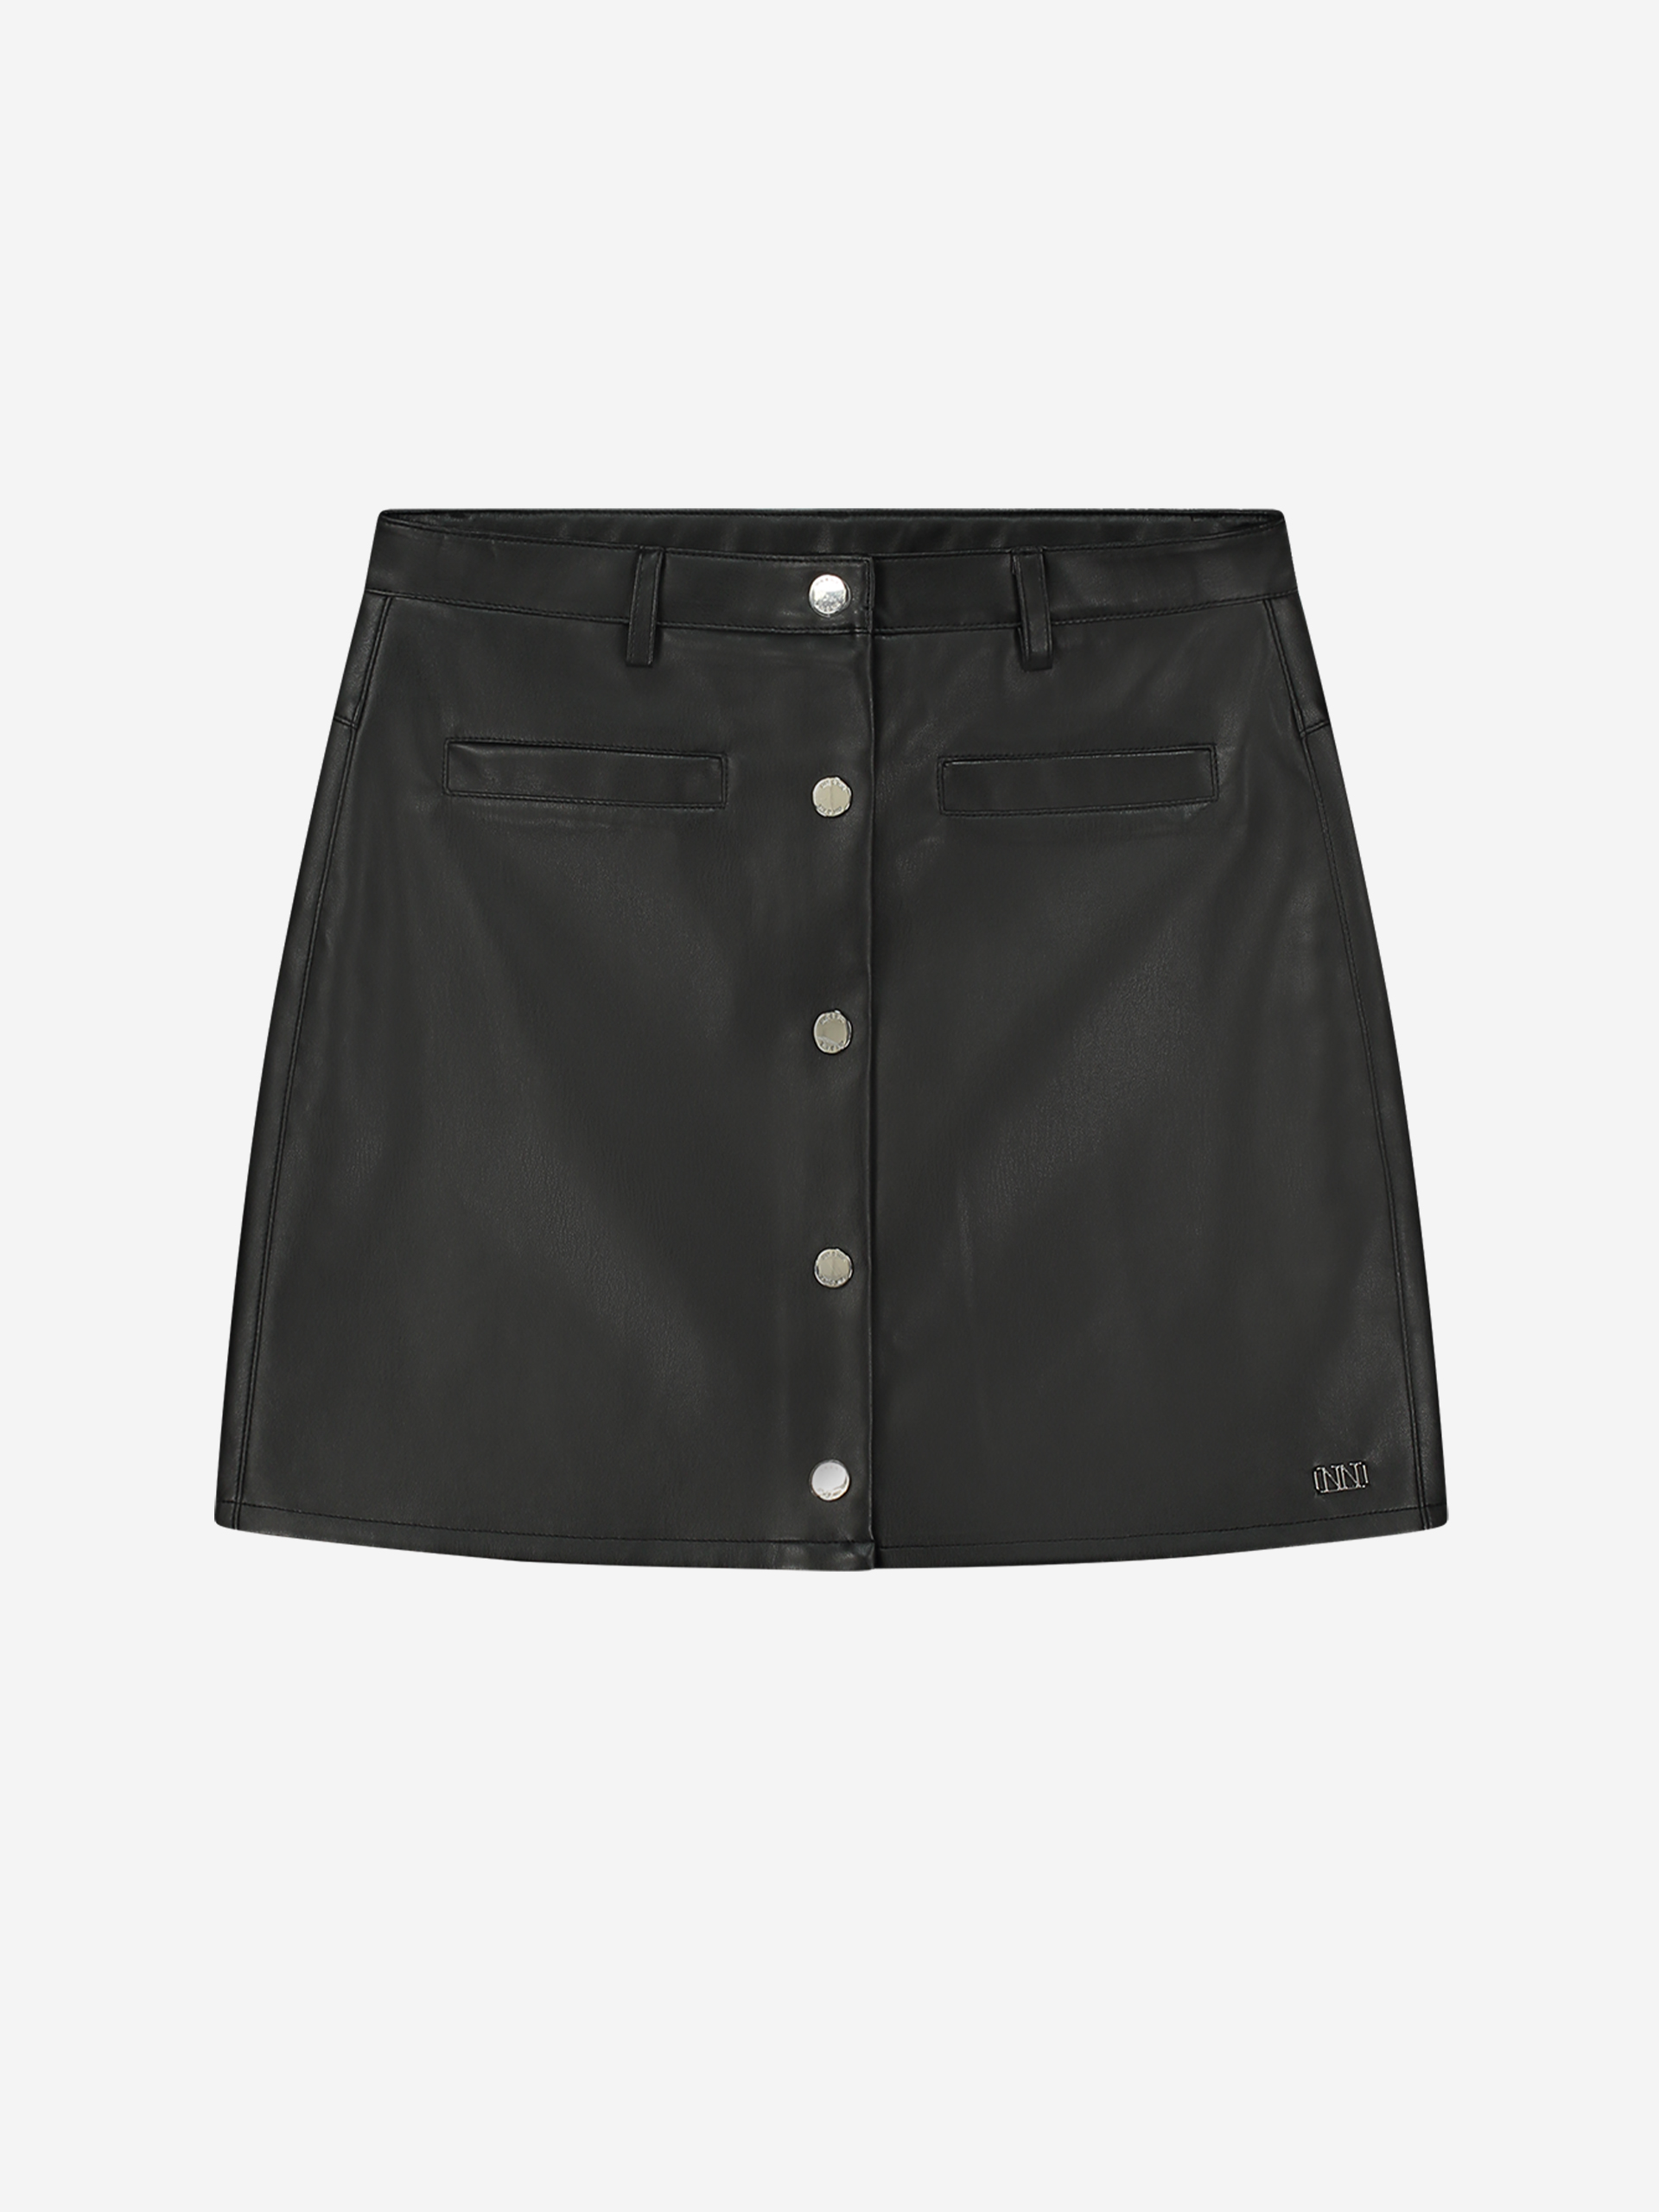  Fitted vegan leather skirt